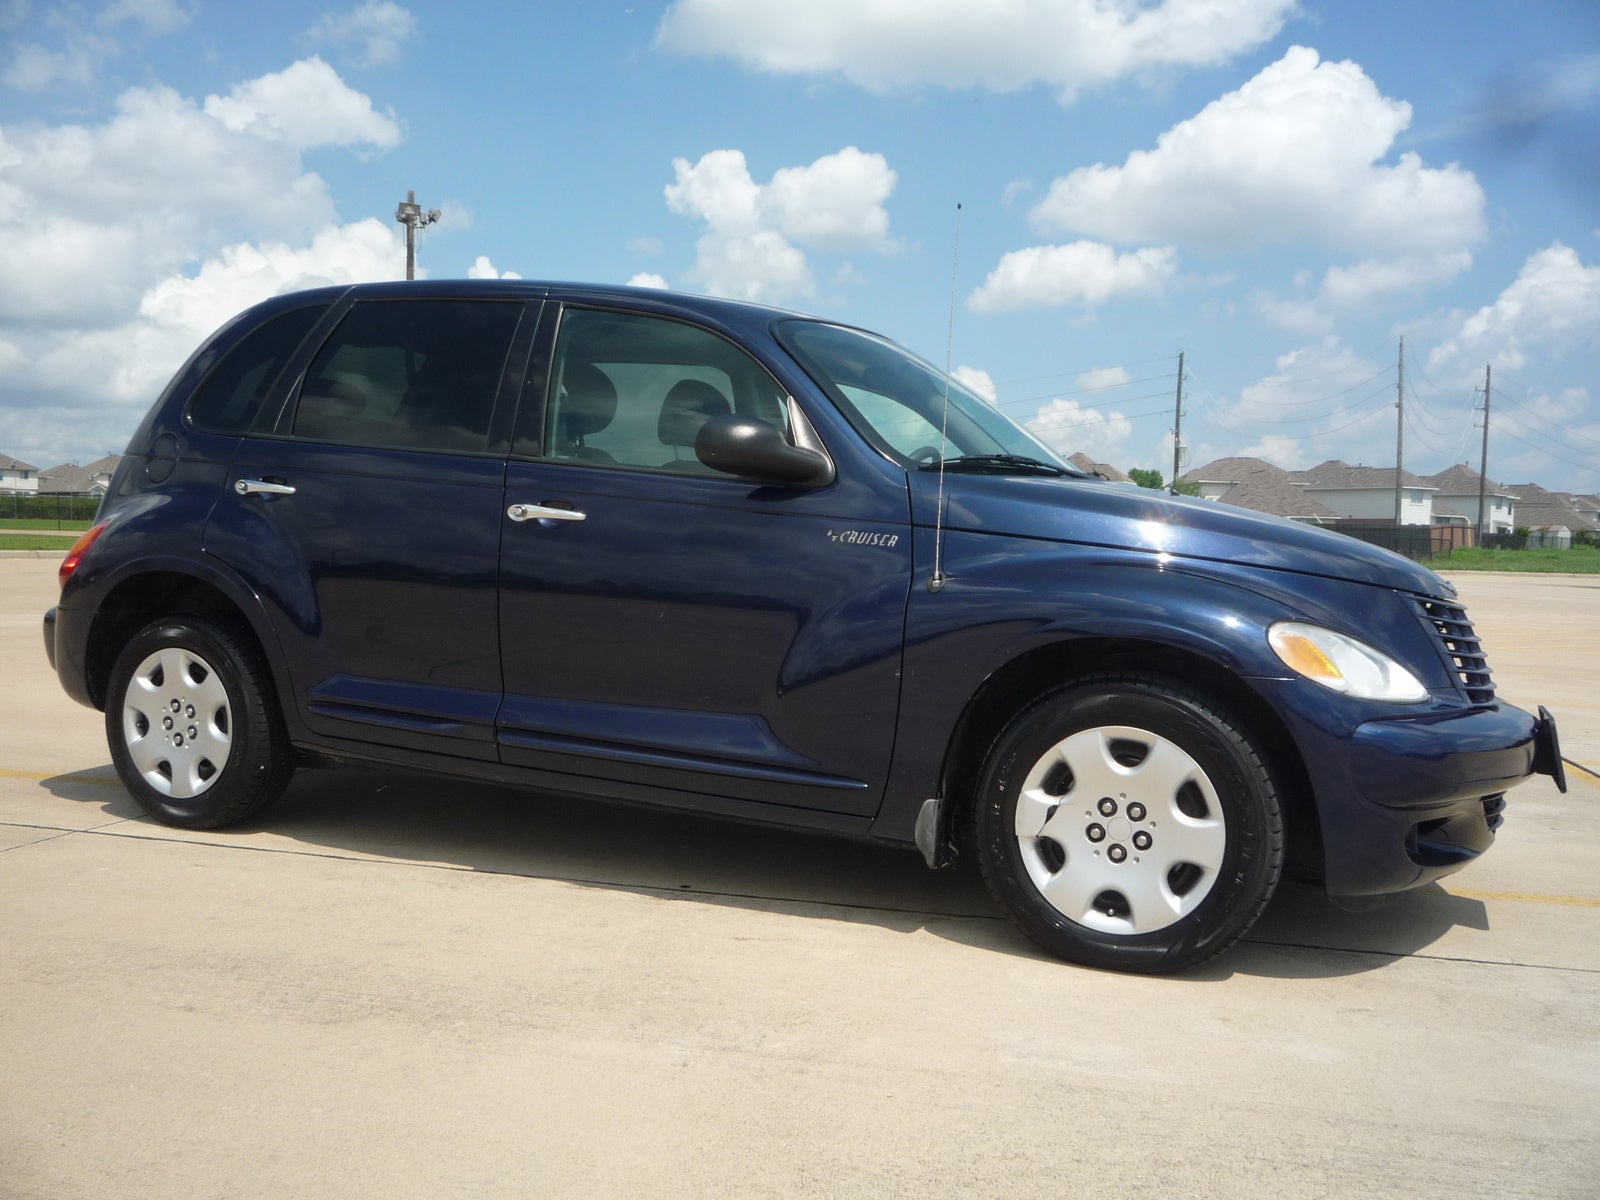 2005 Chrysler pt cruiser limited edition review #3